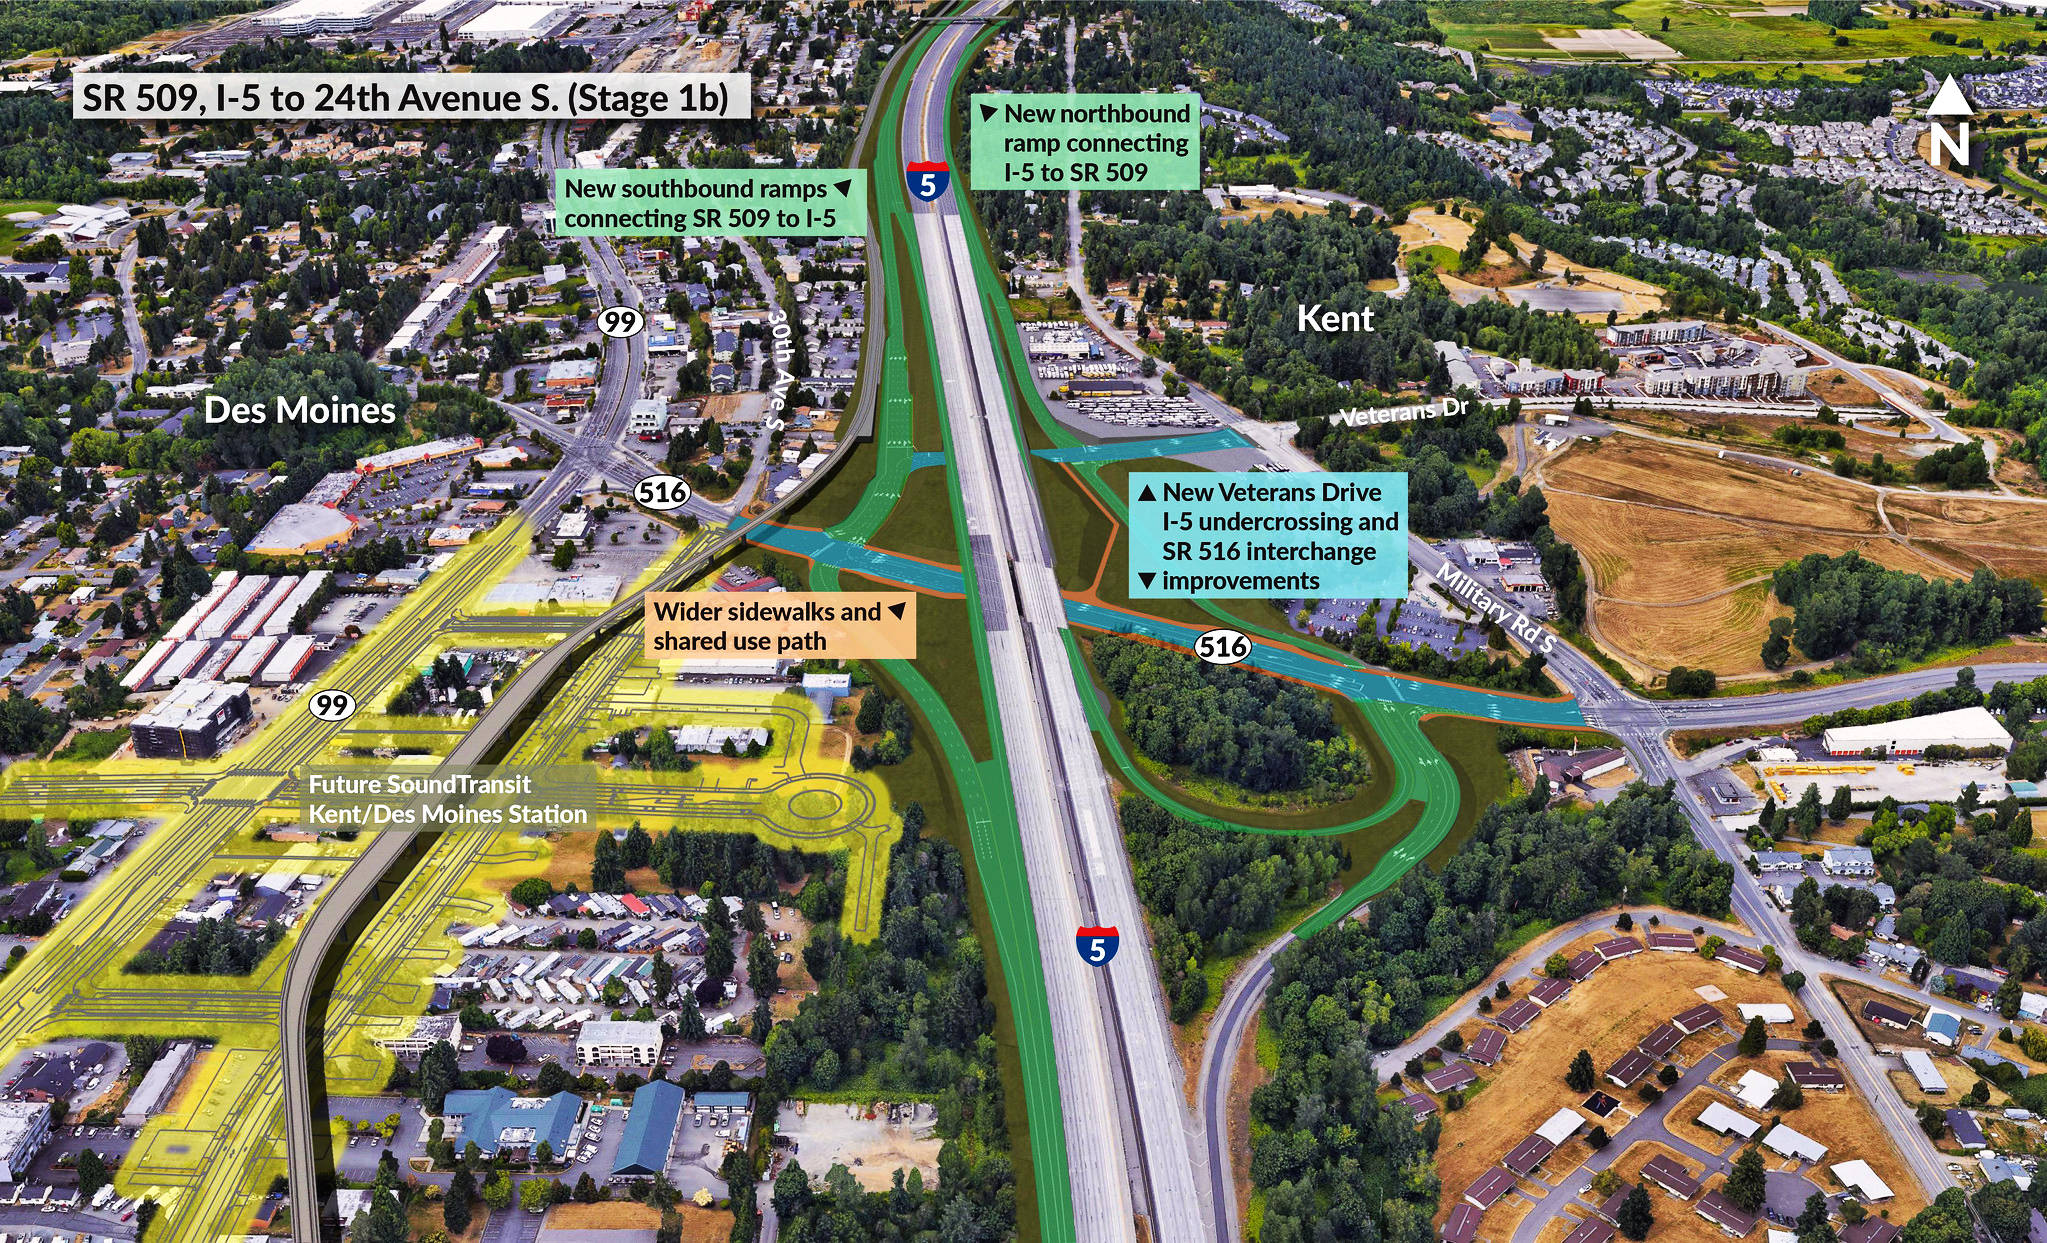 A reconfigured SR 516 interchange, new ramps that provide connections between SR 509 and I-5, and non-motorized improvements will make it easier for people who drive, walk, bike and use transit to travel through the area after the project is completed in several years. COURTESY GRAPHIC, WSDOT